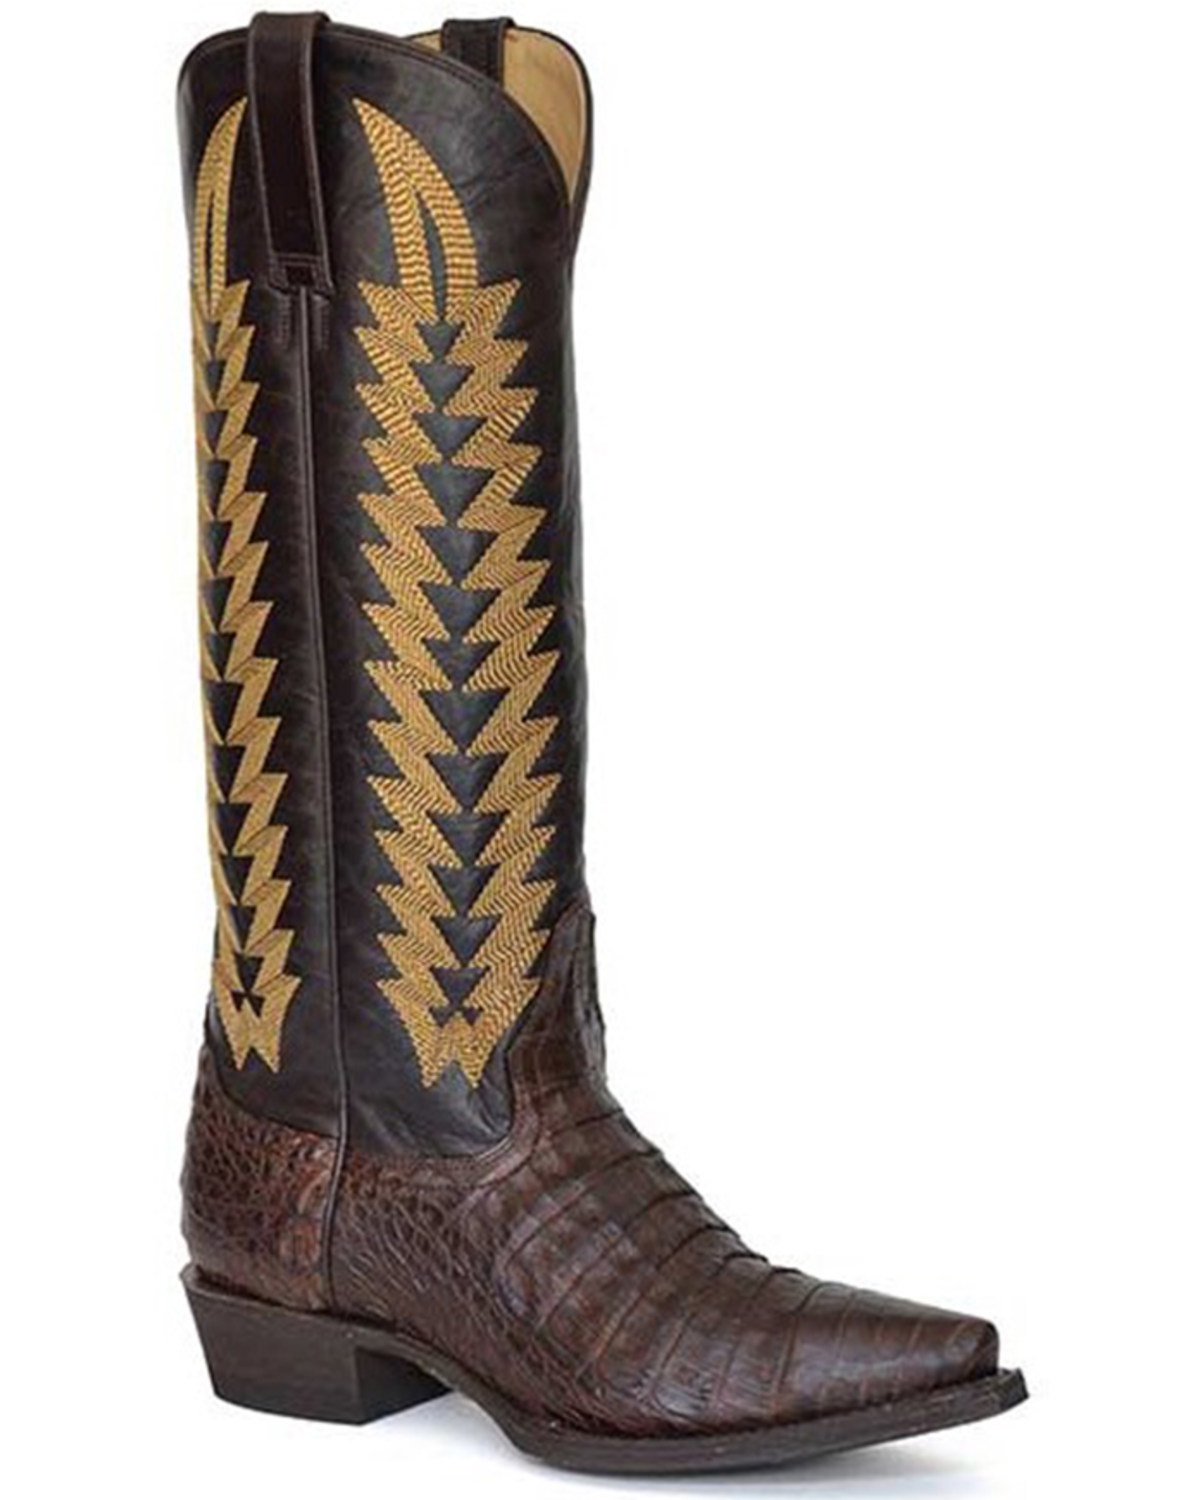 Stetson Women's Exotic Caiman Western Boots - Snip Toe